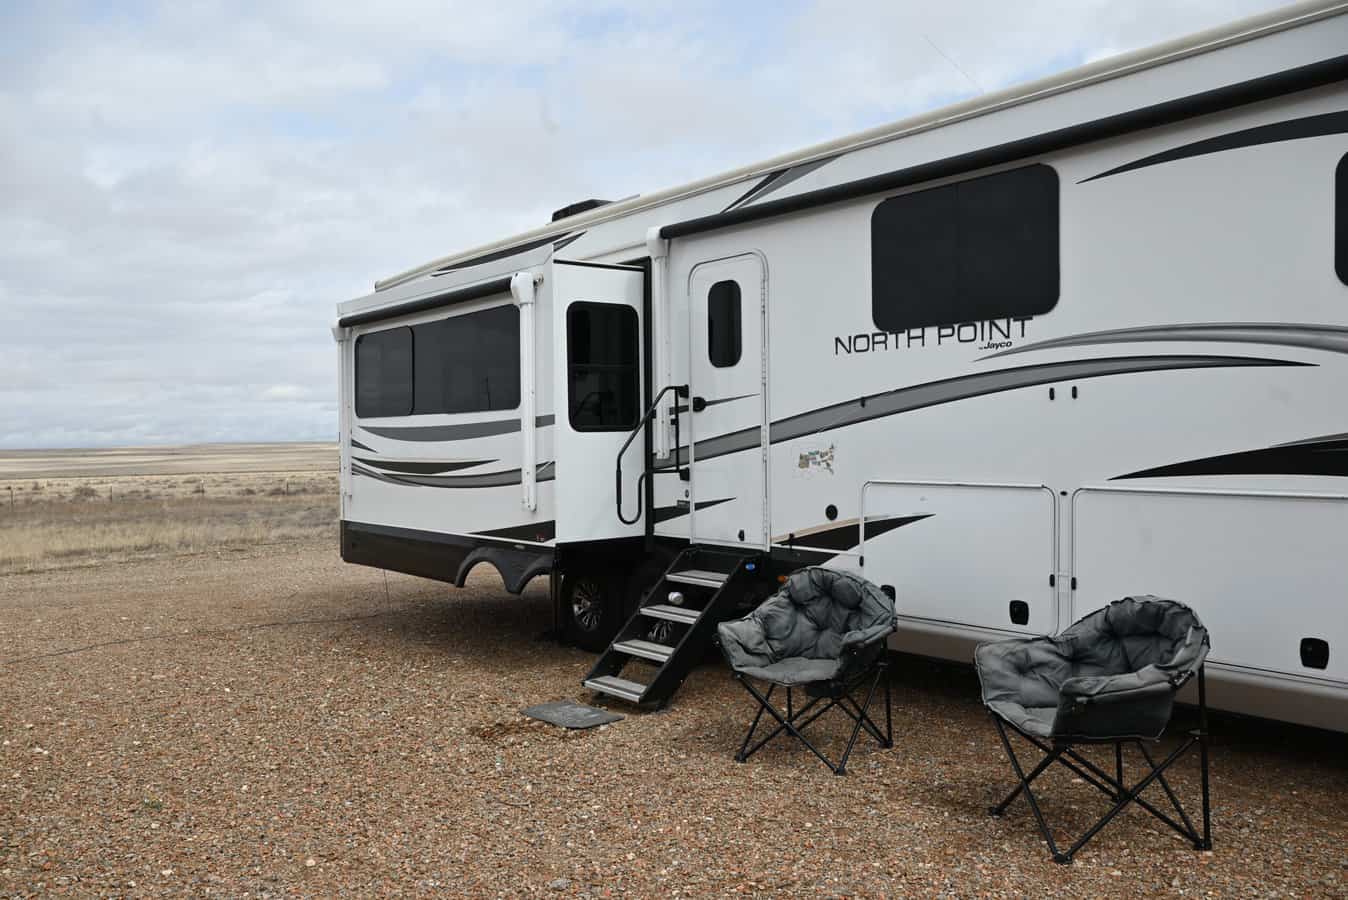 RV campsite setup, feature image for RVing vs Airbnb